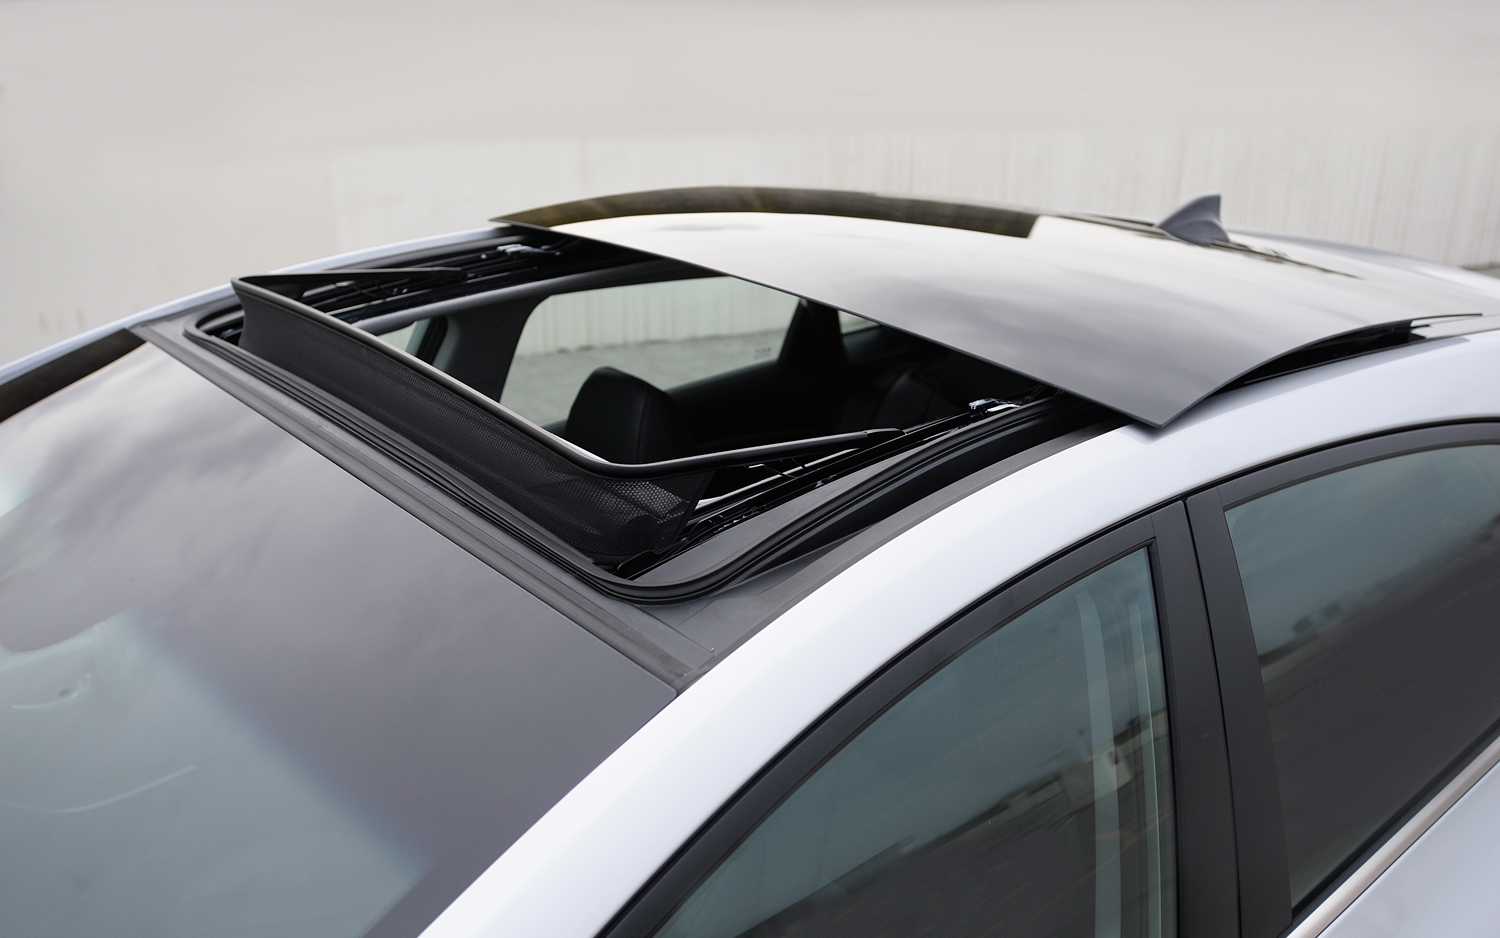 Common car sunroof problems and sunroof maintenance